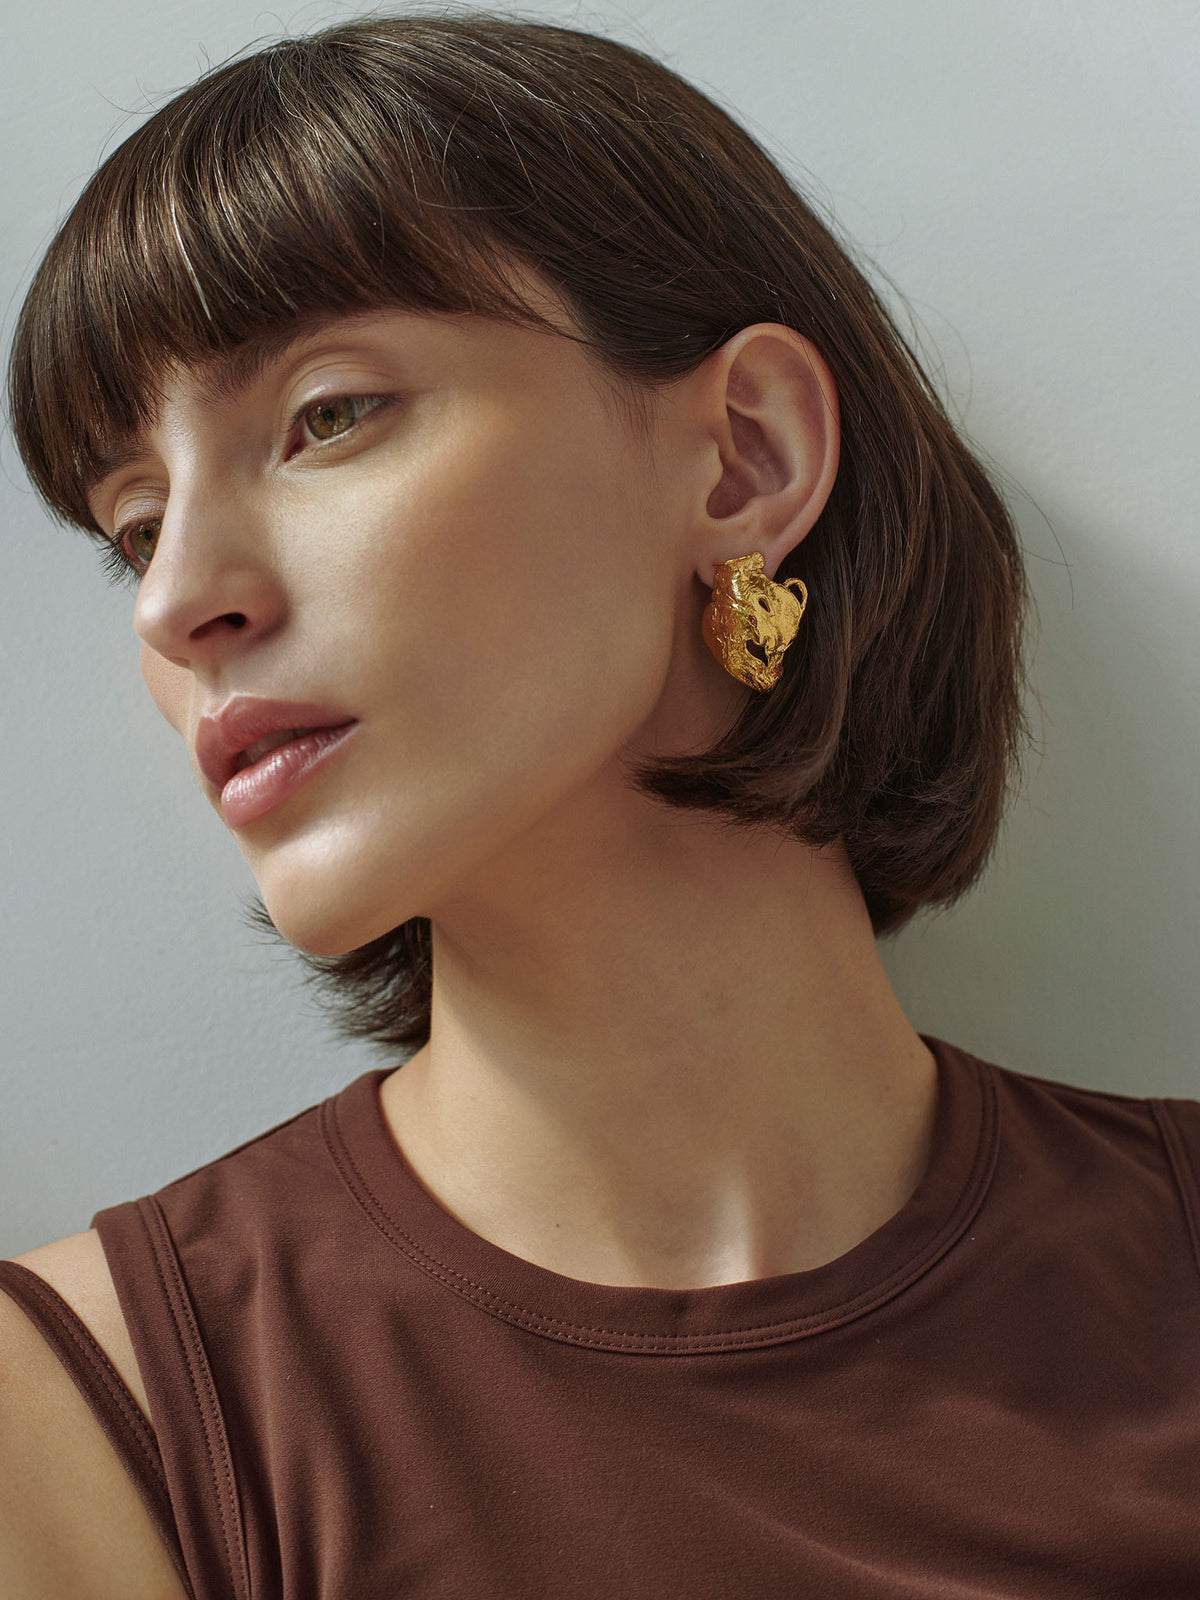 Vacation Amphora Earrings Gold